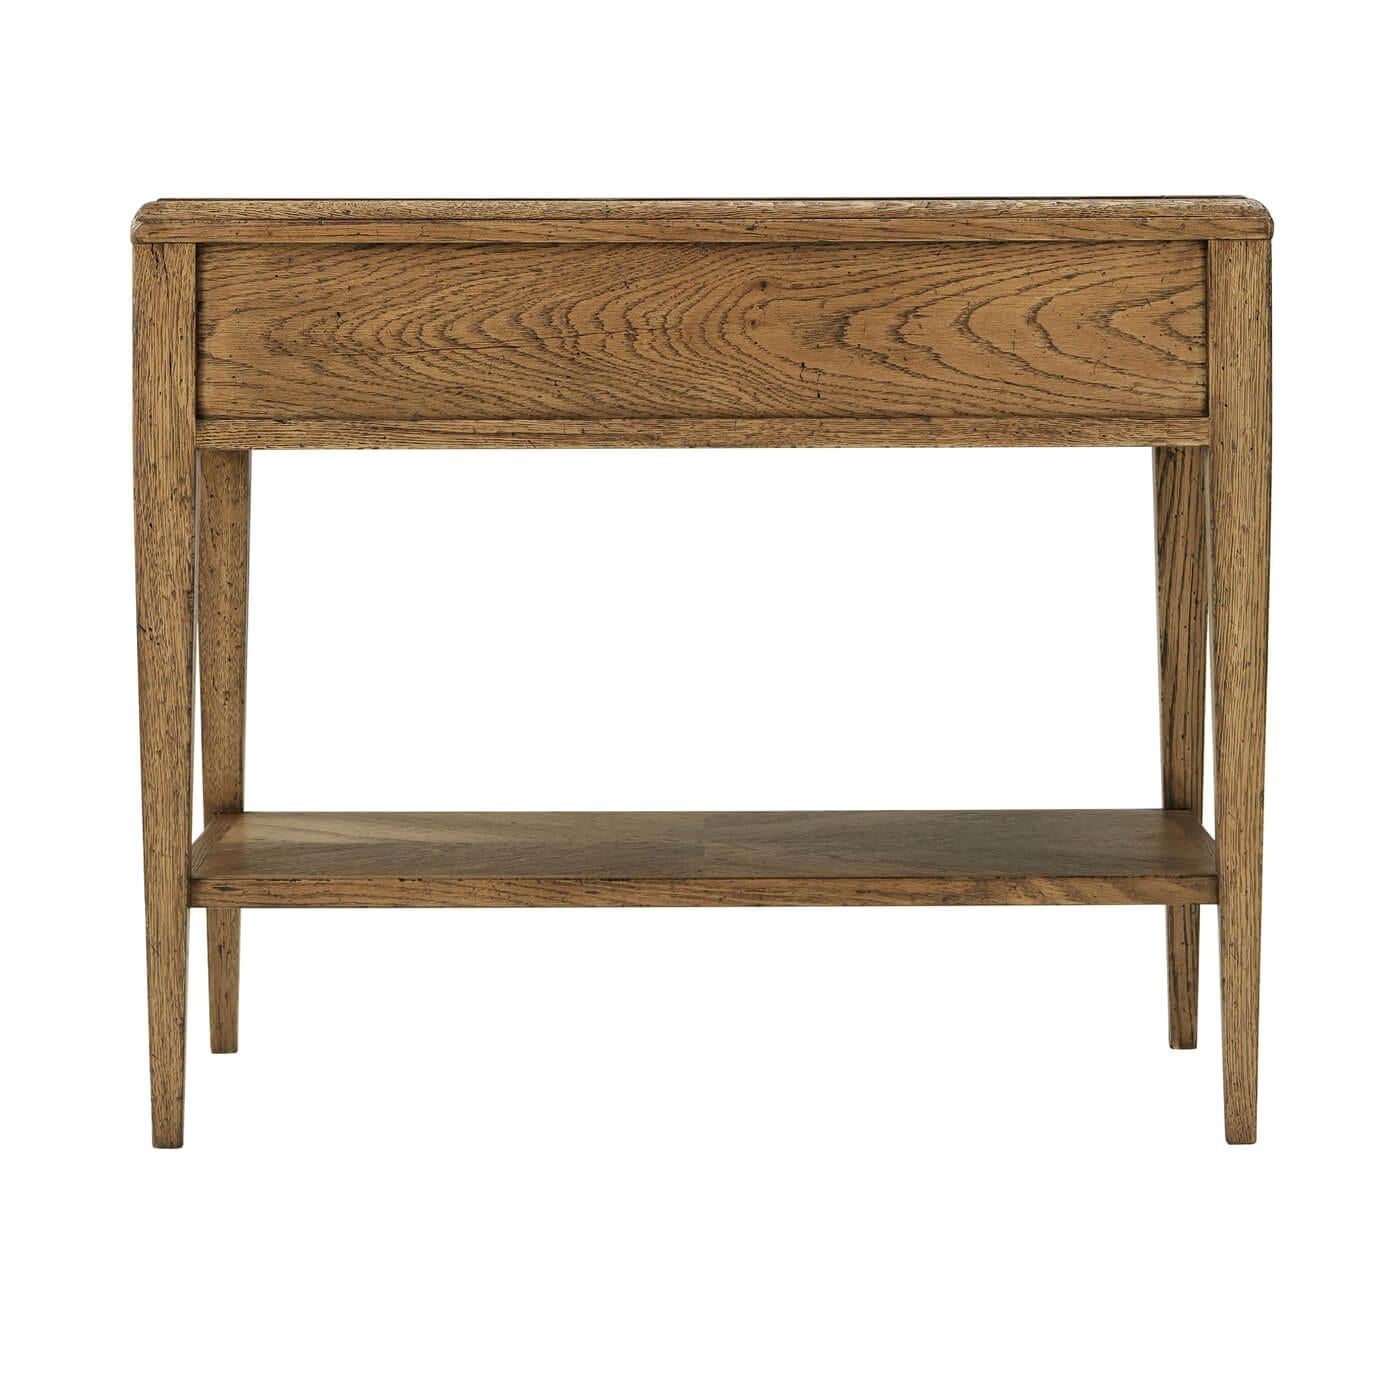 Contemporary Rustic Oak End Table For Sale